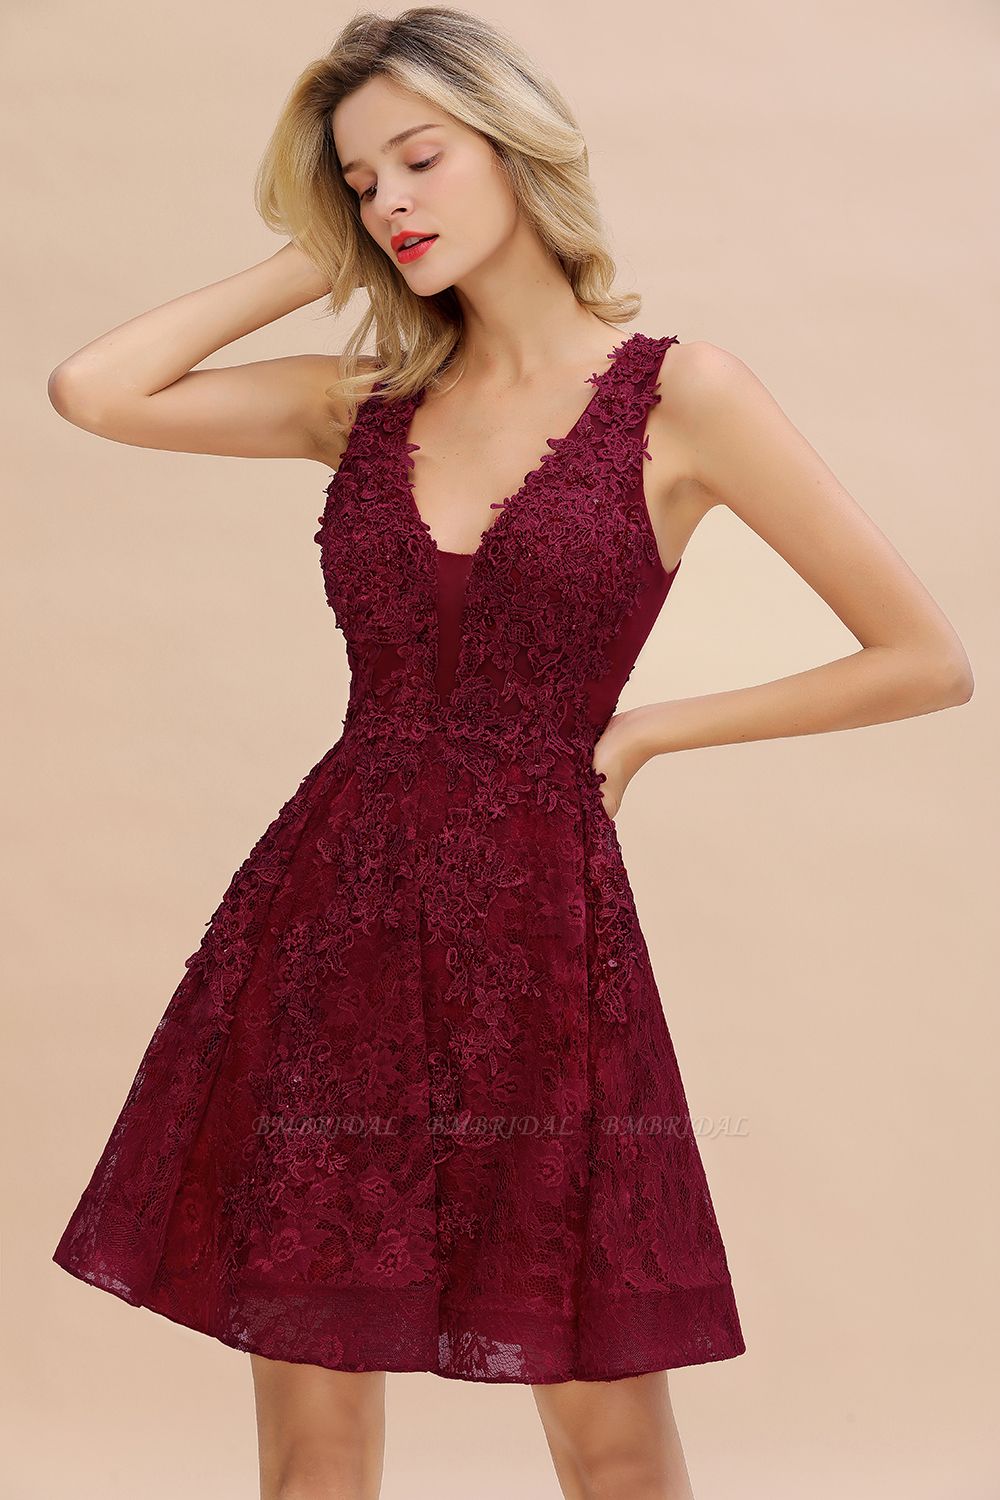 BMbridal Burgundy Sleeveless Lace Short Prom Dress Mini Party Gowns Online